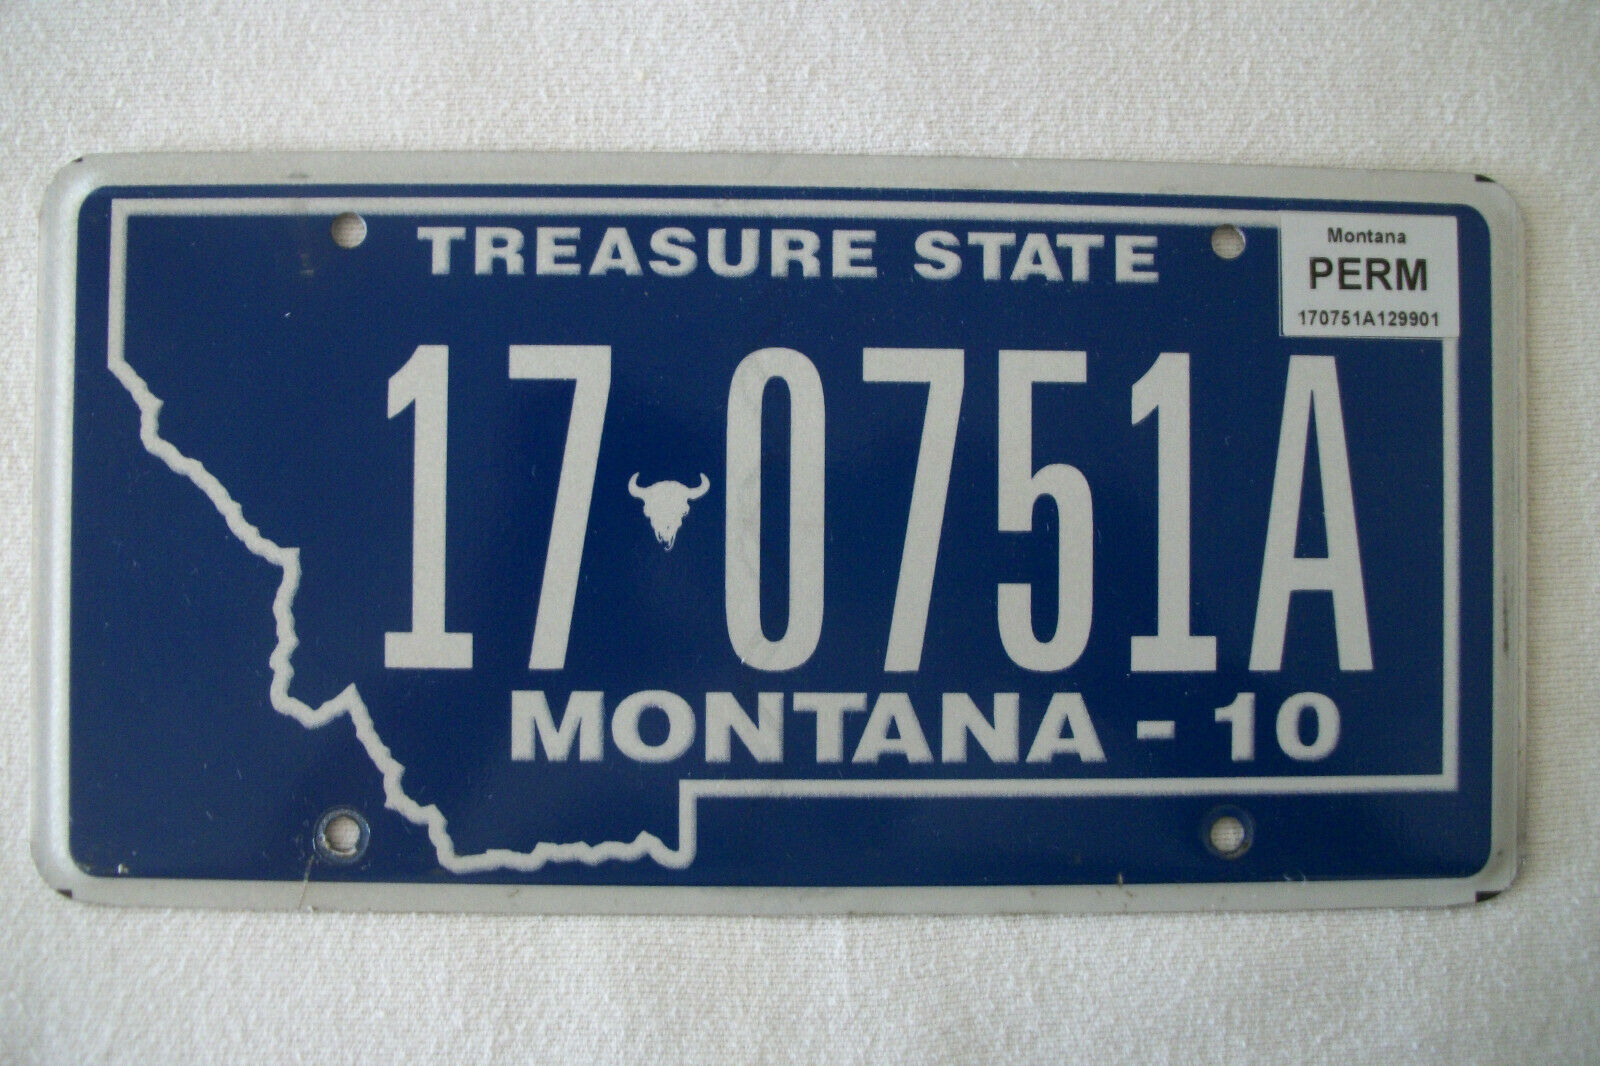 Montana License Plate Flate Expired 3 Year Or More Treasure State # 17 0751a